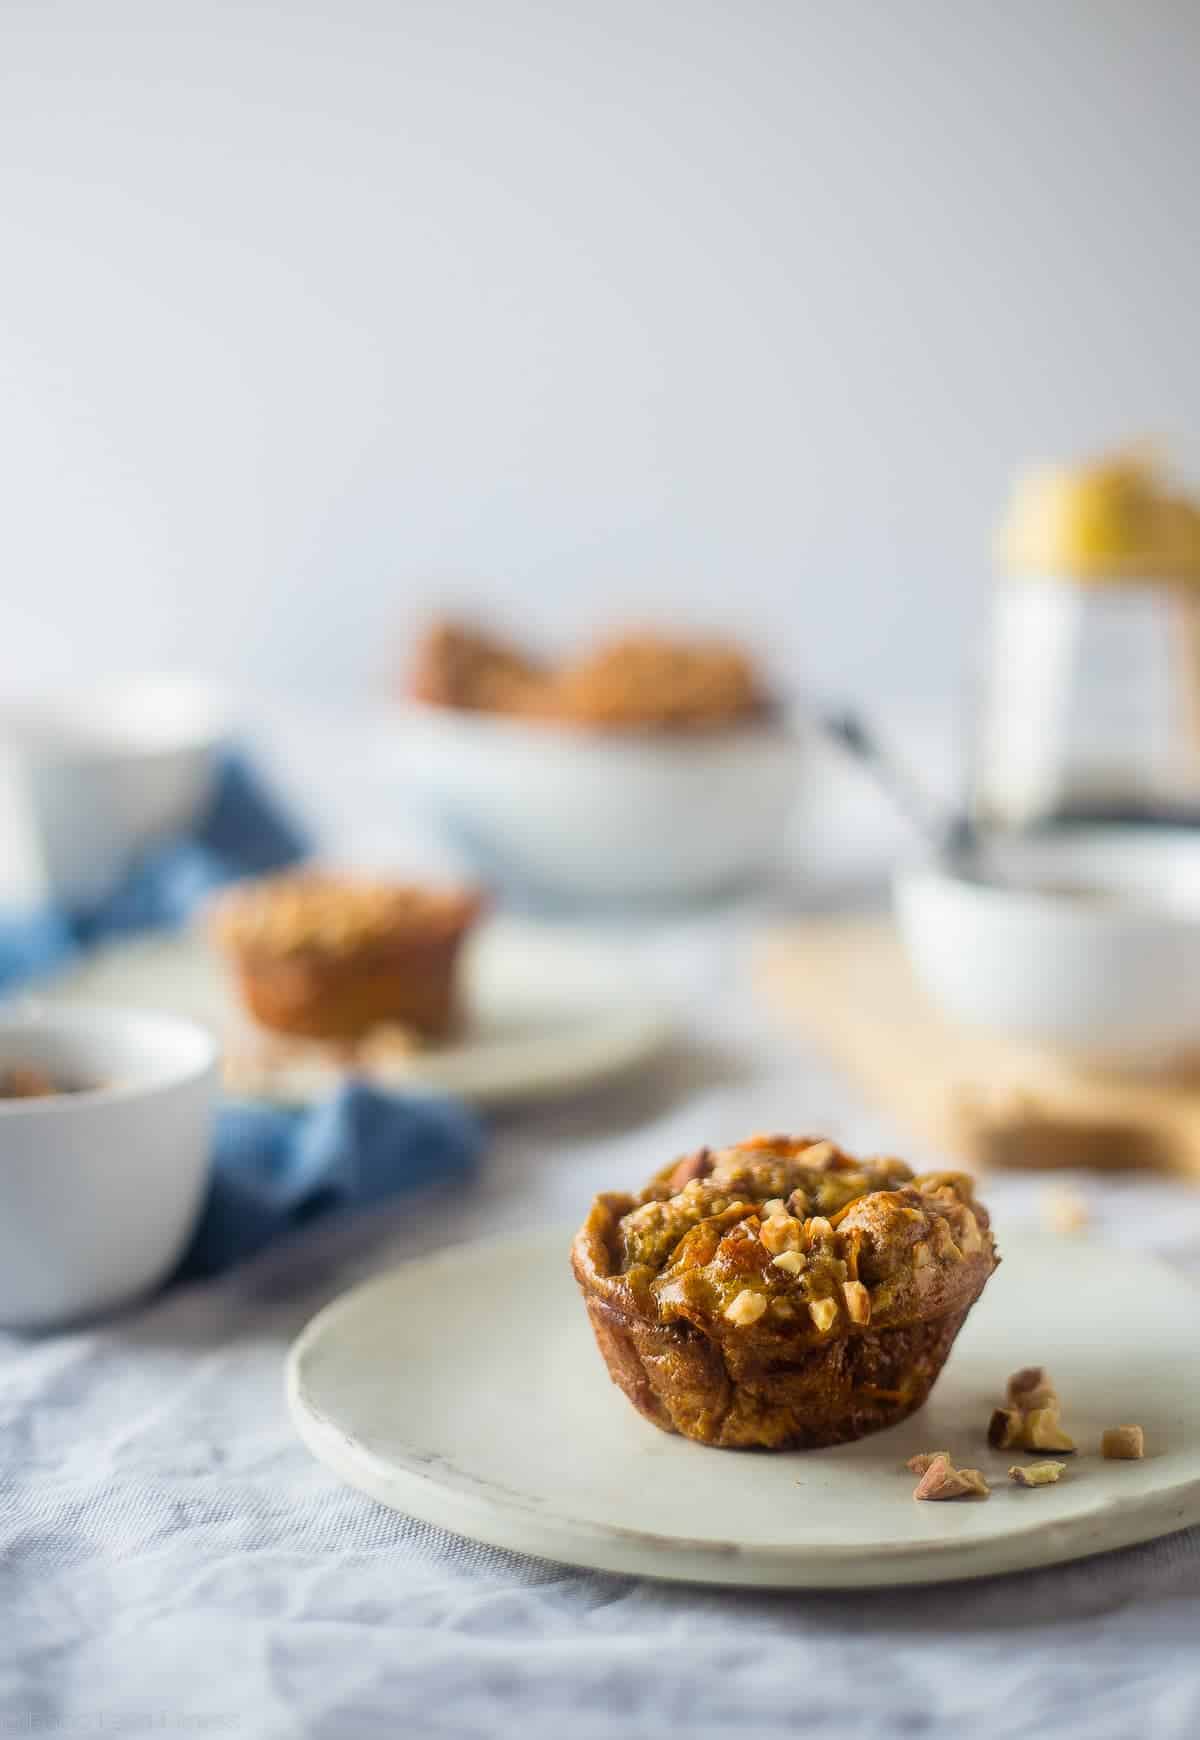 Paleo Egg Muffins with Maple Almond Sweet Potato Noodles and Bacon - A sweet and savory, portable breakfast or snack that is gluten free, protein packed, low carb and perfect for busy mornings! | Foodfaithfitness.com | @FoodFaithFit